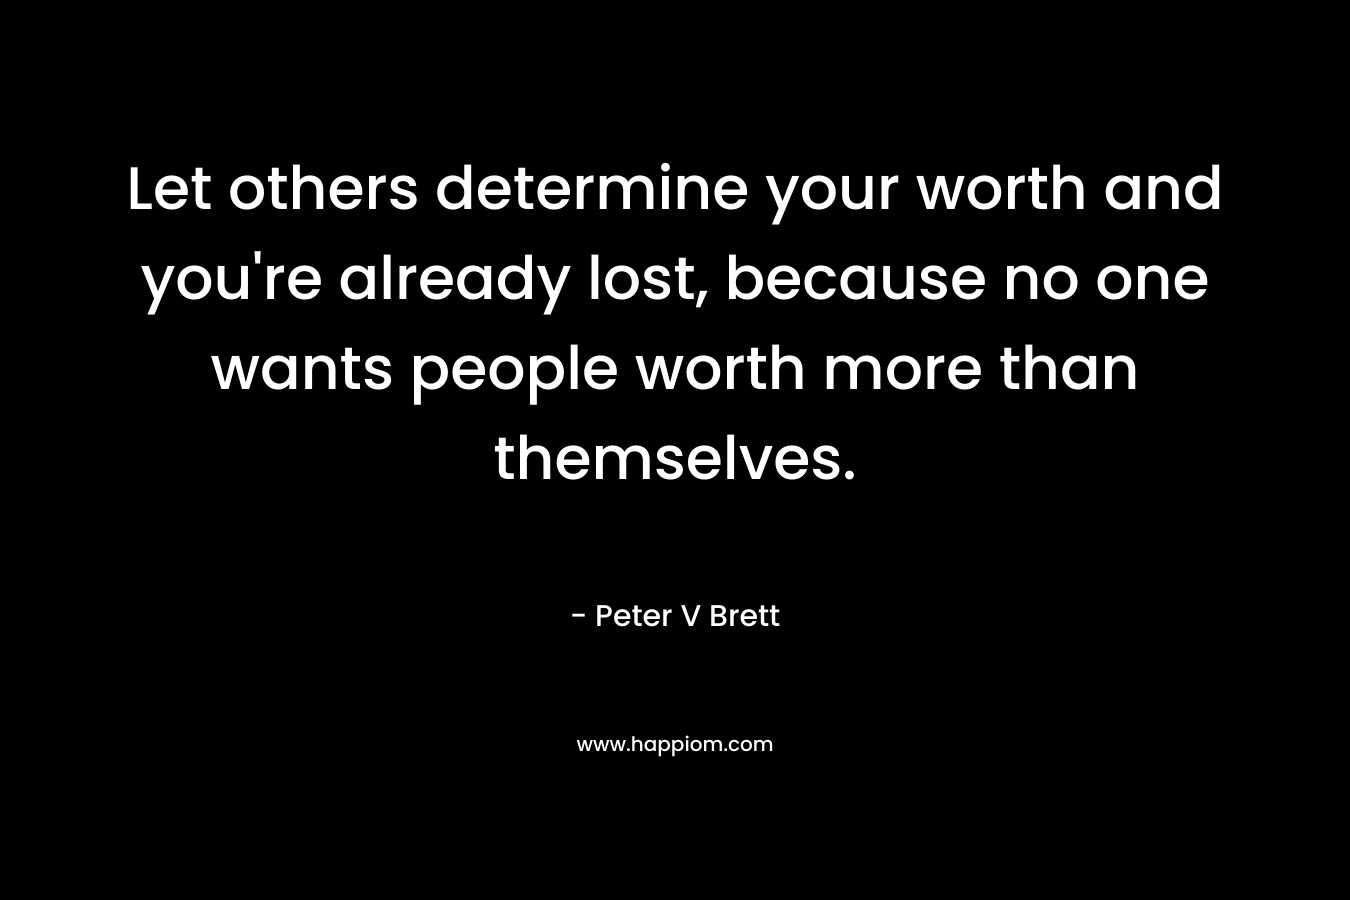 Let others determine your worth and you're already lost, because no one wants people worth more than themselves.